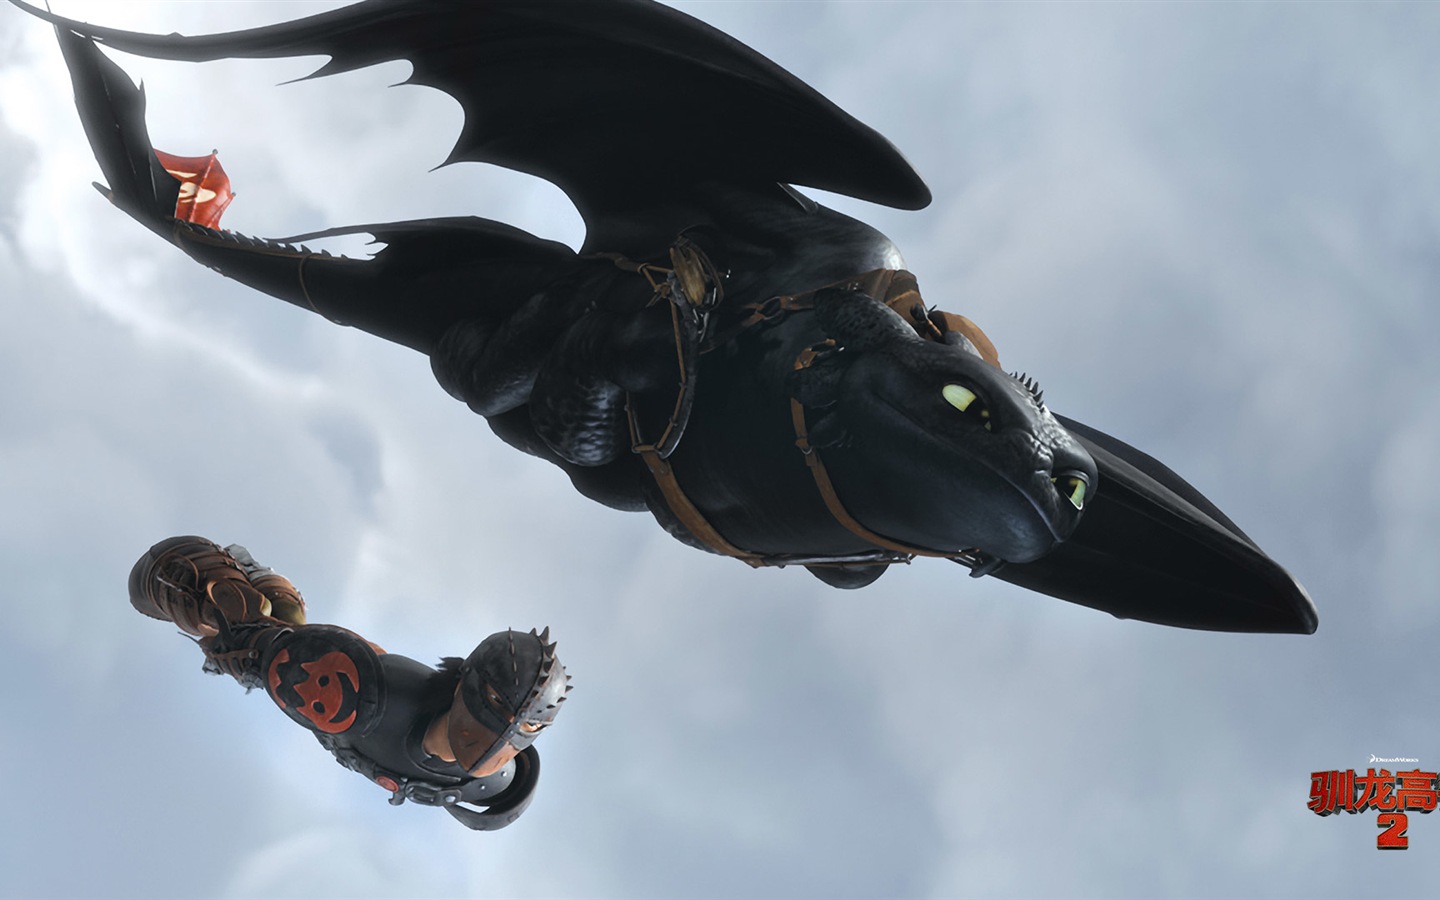 How to Train Your Dragon 2 HD wallpapers #6 - 1440x900